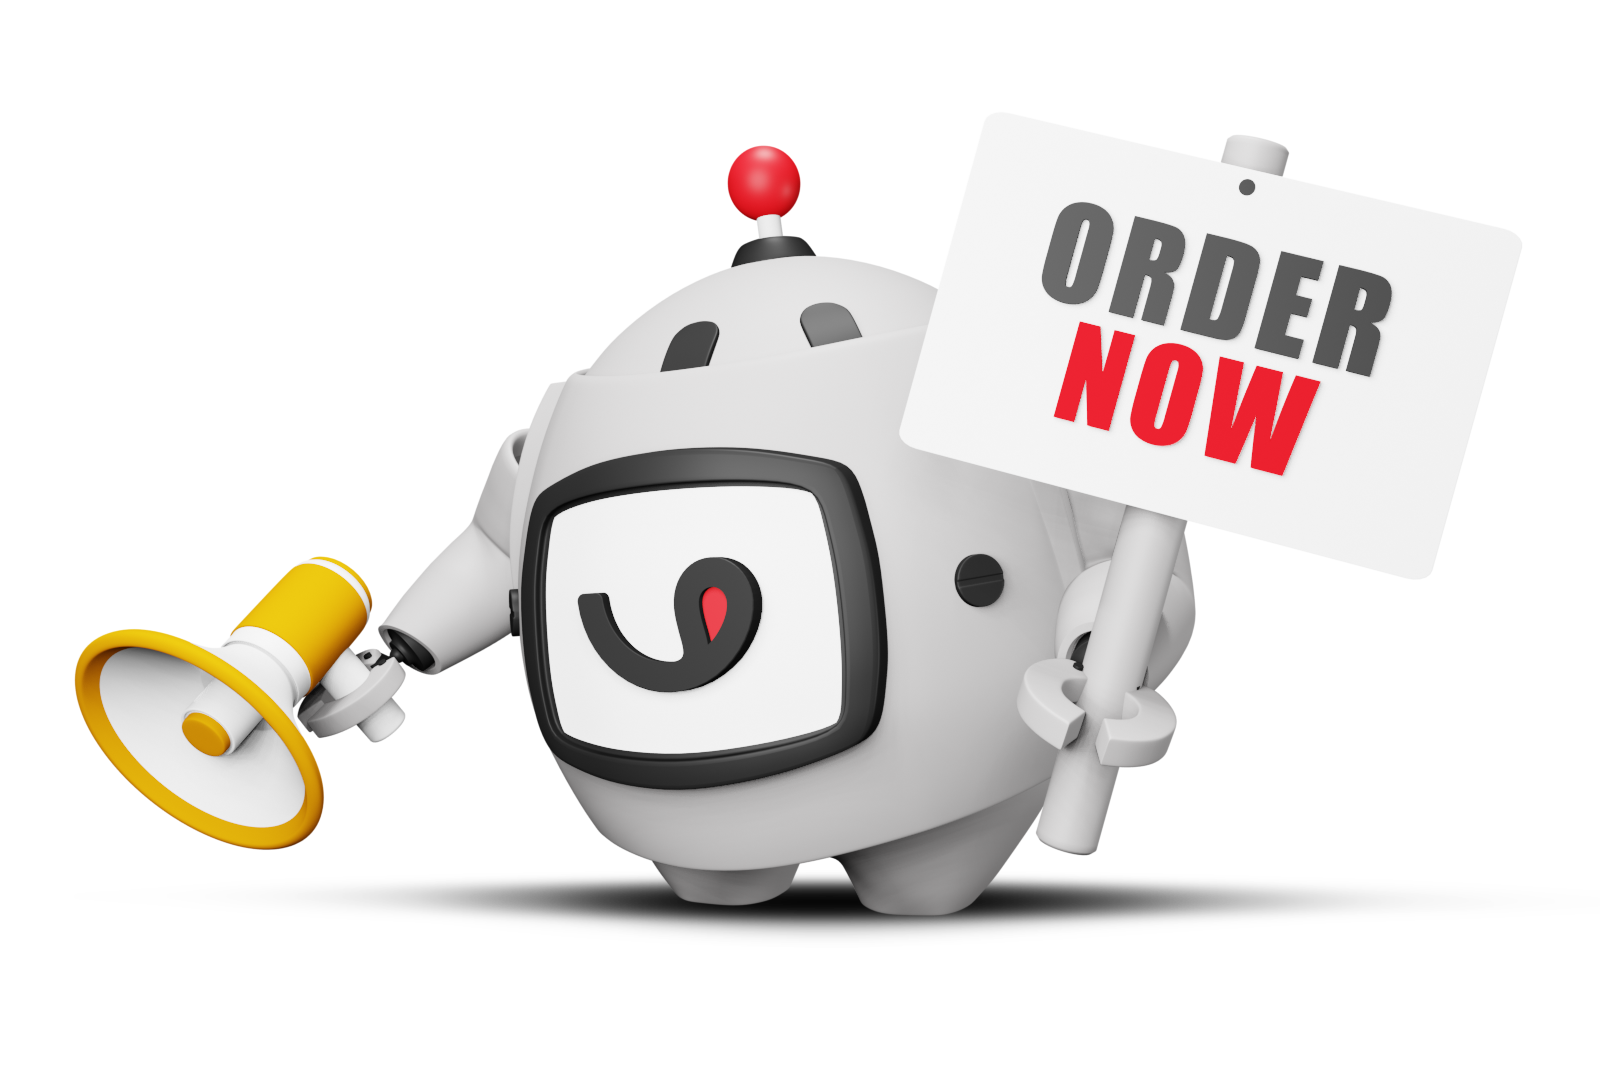 Robot holding order now sign